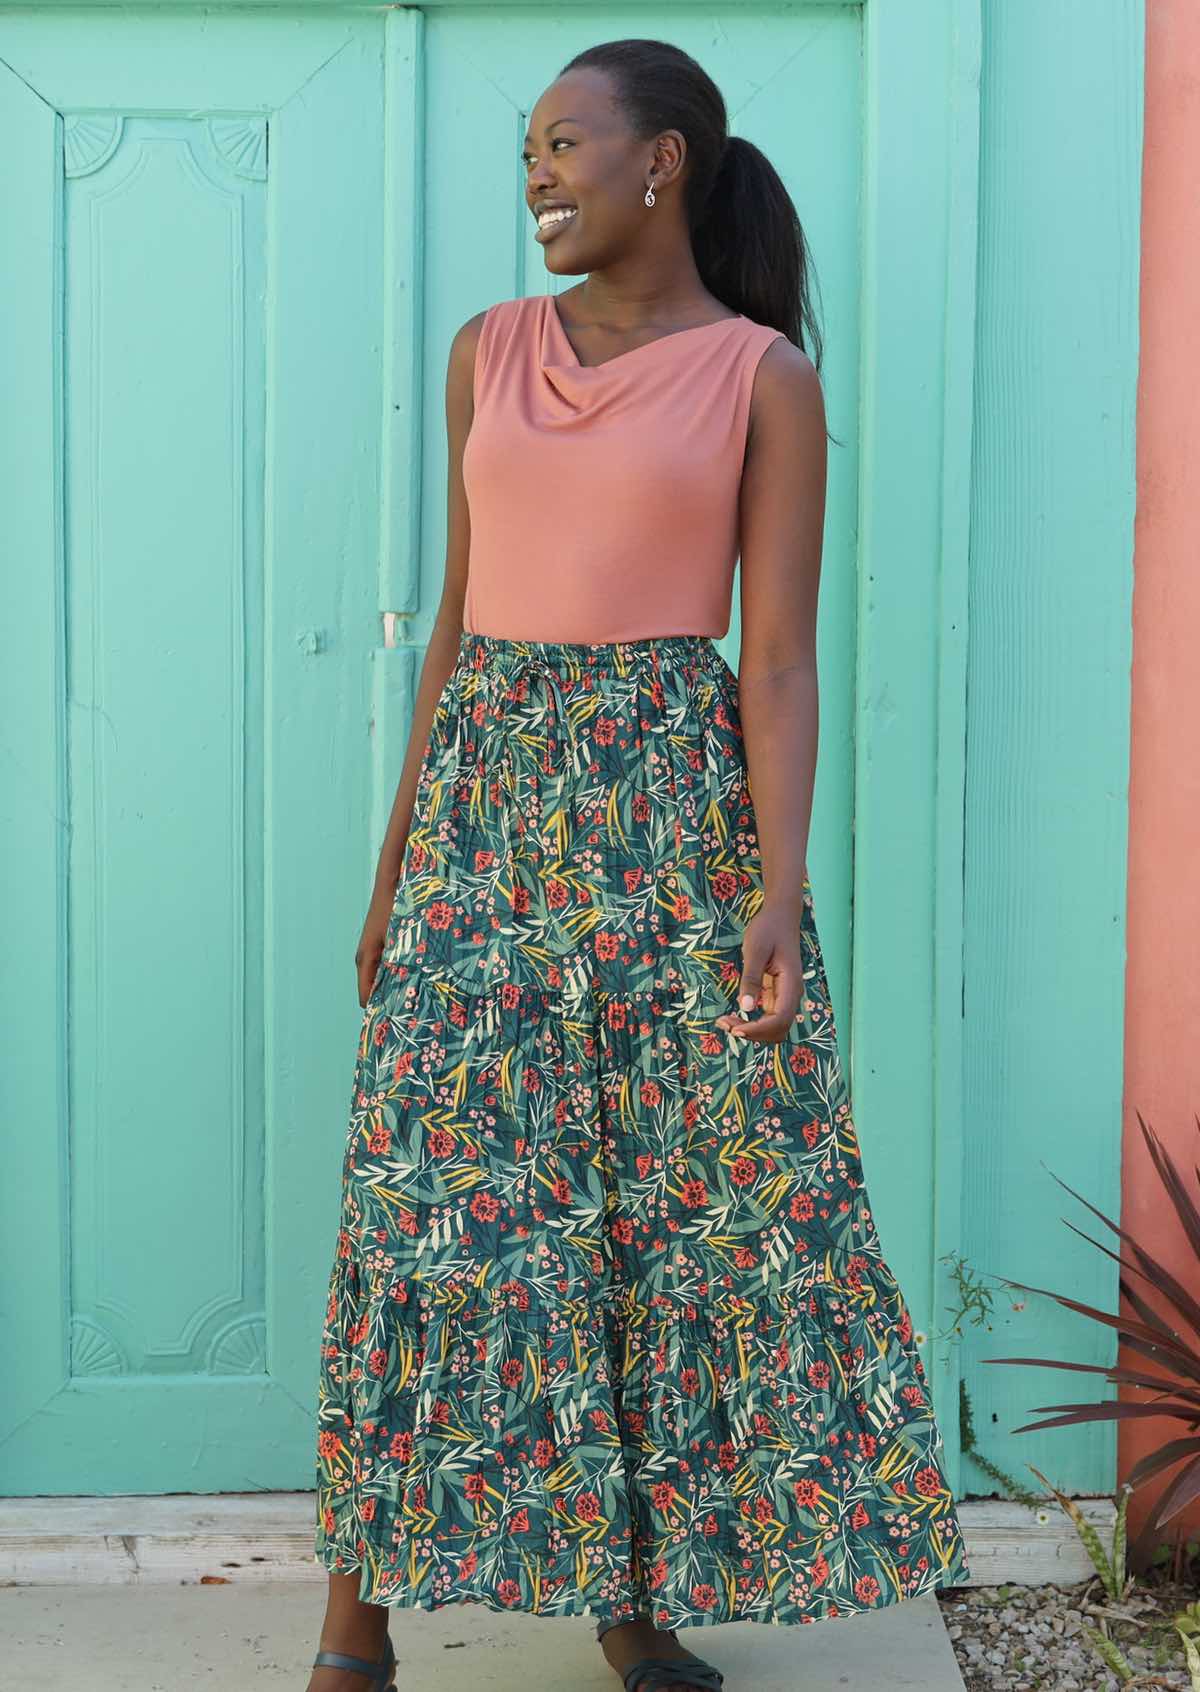 Model styles her maxi skirt with a sleeveless top and sandals. 